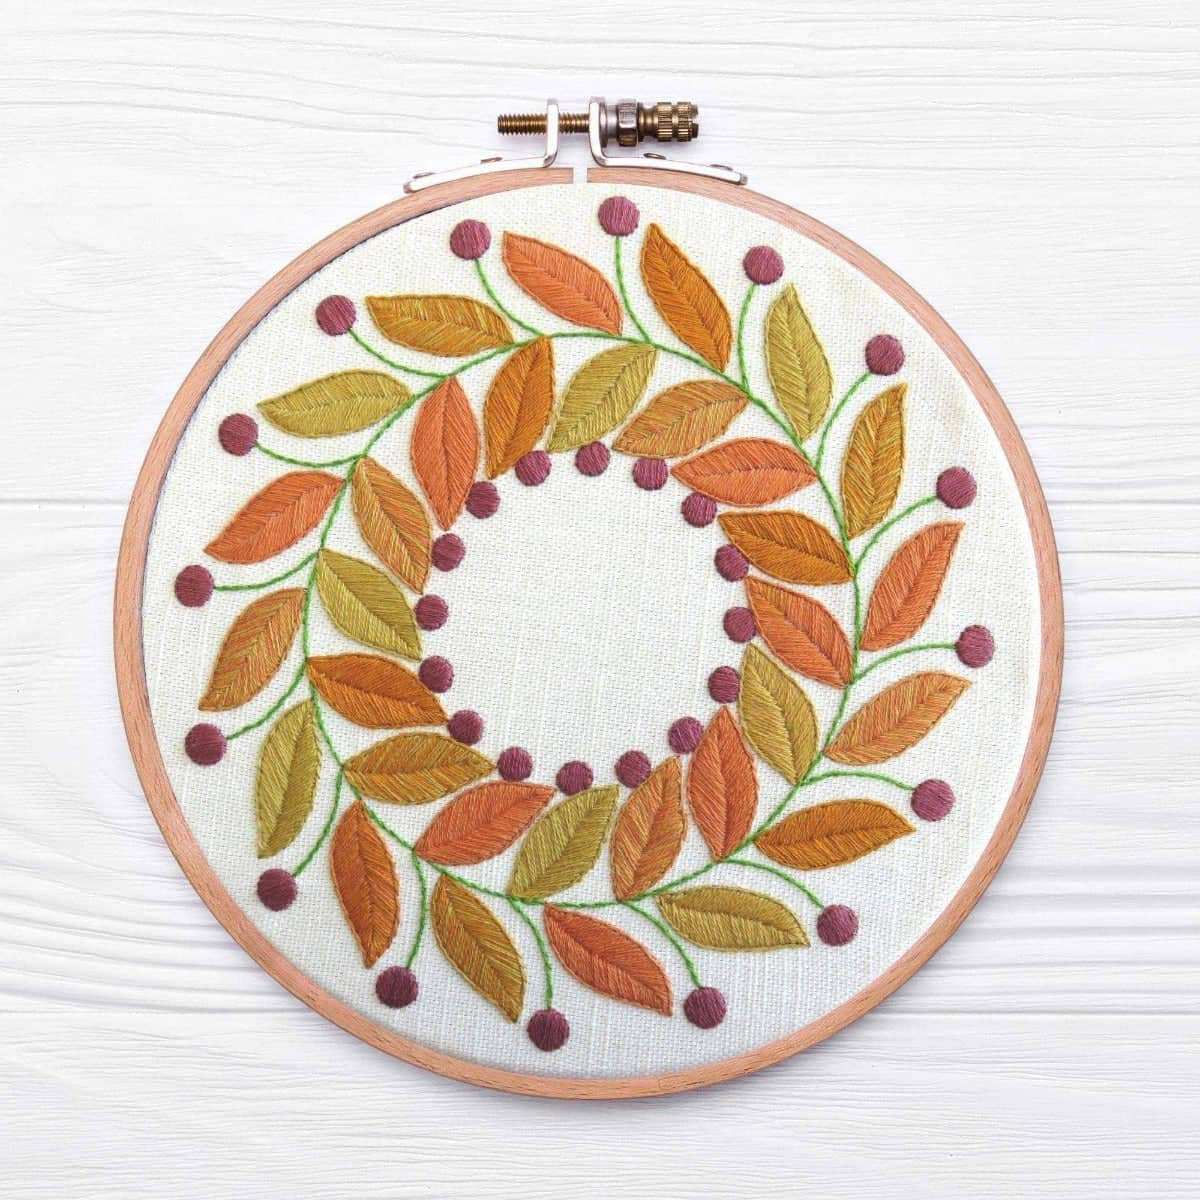 Golden Leaves, Pre Printed Embroidery Fabric Panel , Pre Printed Fabric Pattern , StitchDoodles , embroidery hoop kit, embroidery kits for adults, embroidery kits for beginners, hand embroidery, hand embroidery fabric, modern embroidery kits, PDF pattern, unique embroidery kits , StitchDoodles , shop.stitchdoodles.com